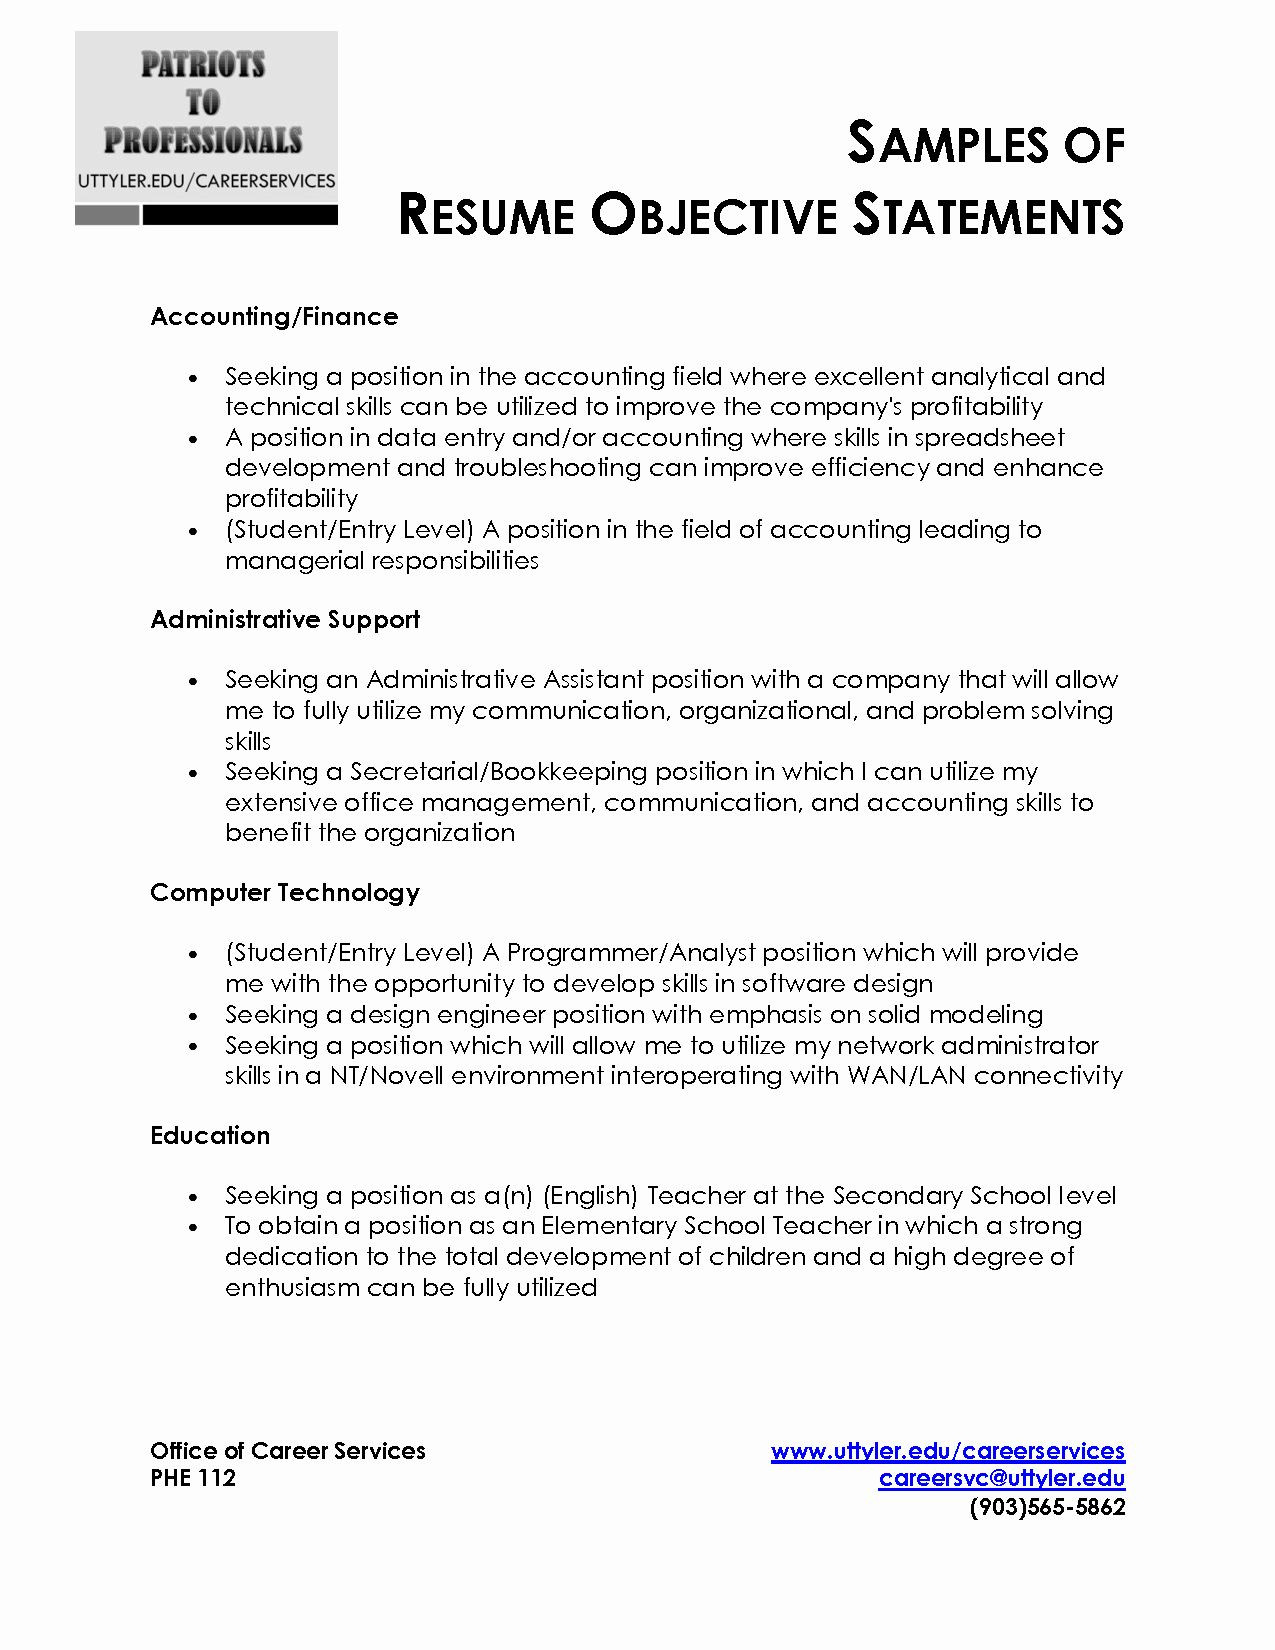 Sample Objective Statements for General Resumes Generic Objective for Resume Luxury General Objective Statement …